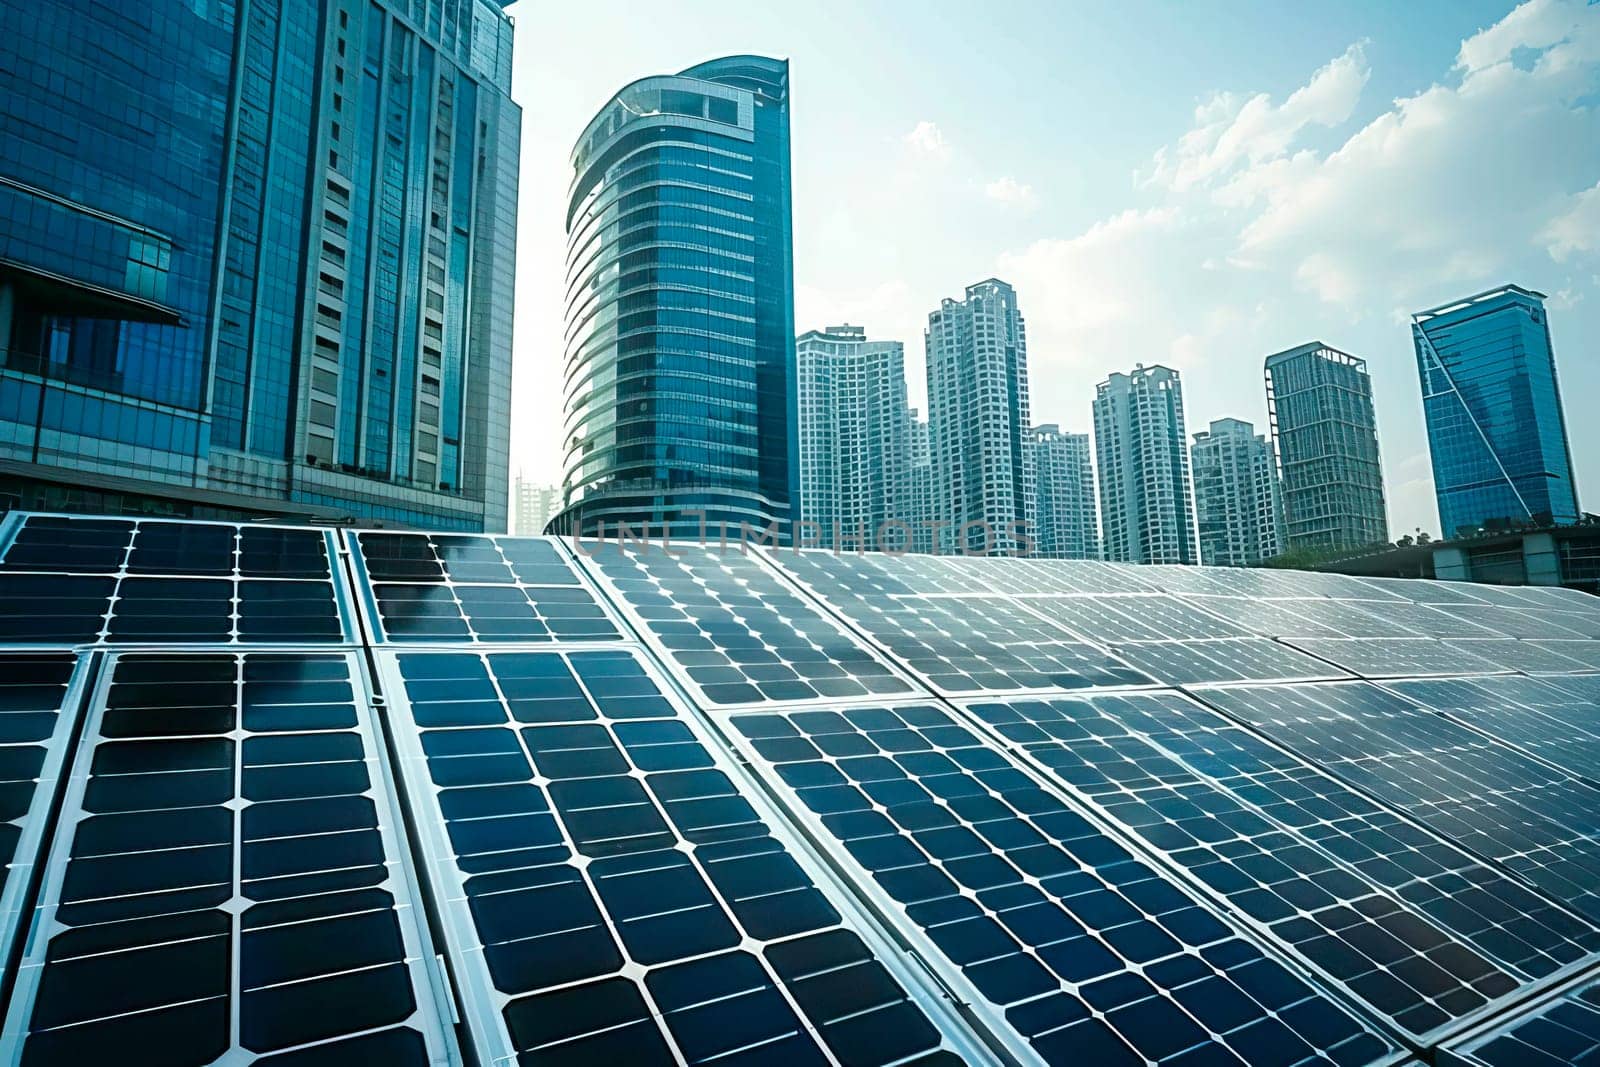 Solar panels on a buildings roof with skyscrapers in the background, utilizing clean energy in an urban setting. by vladimka